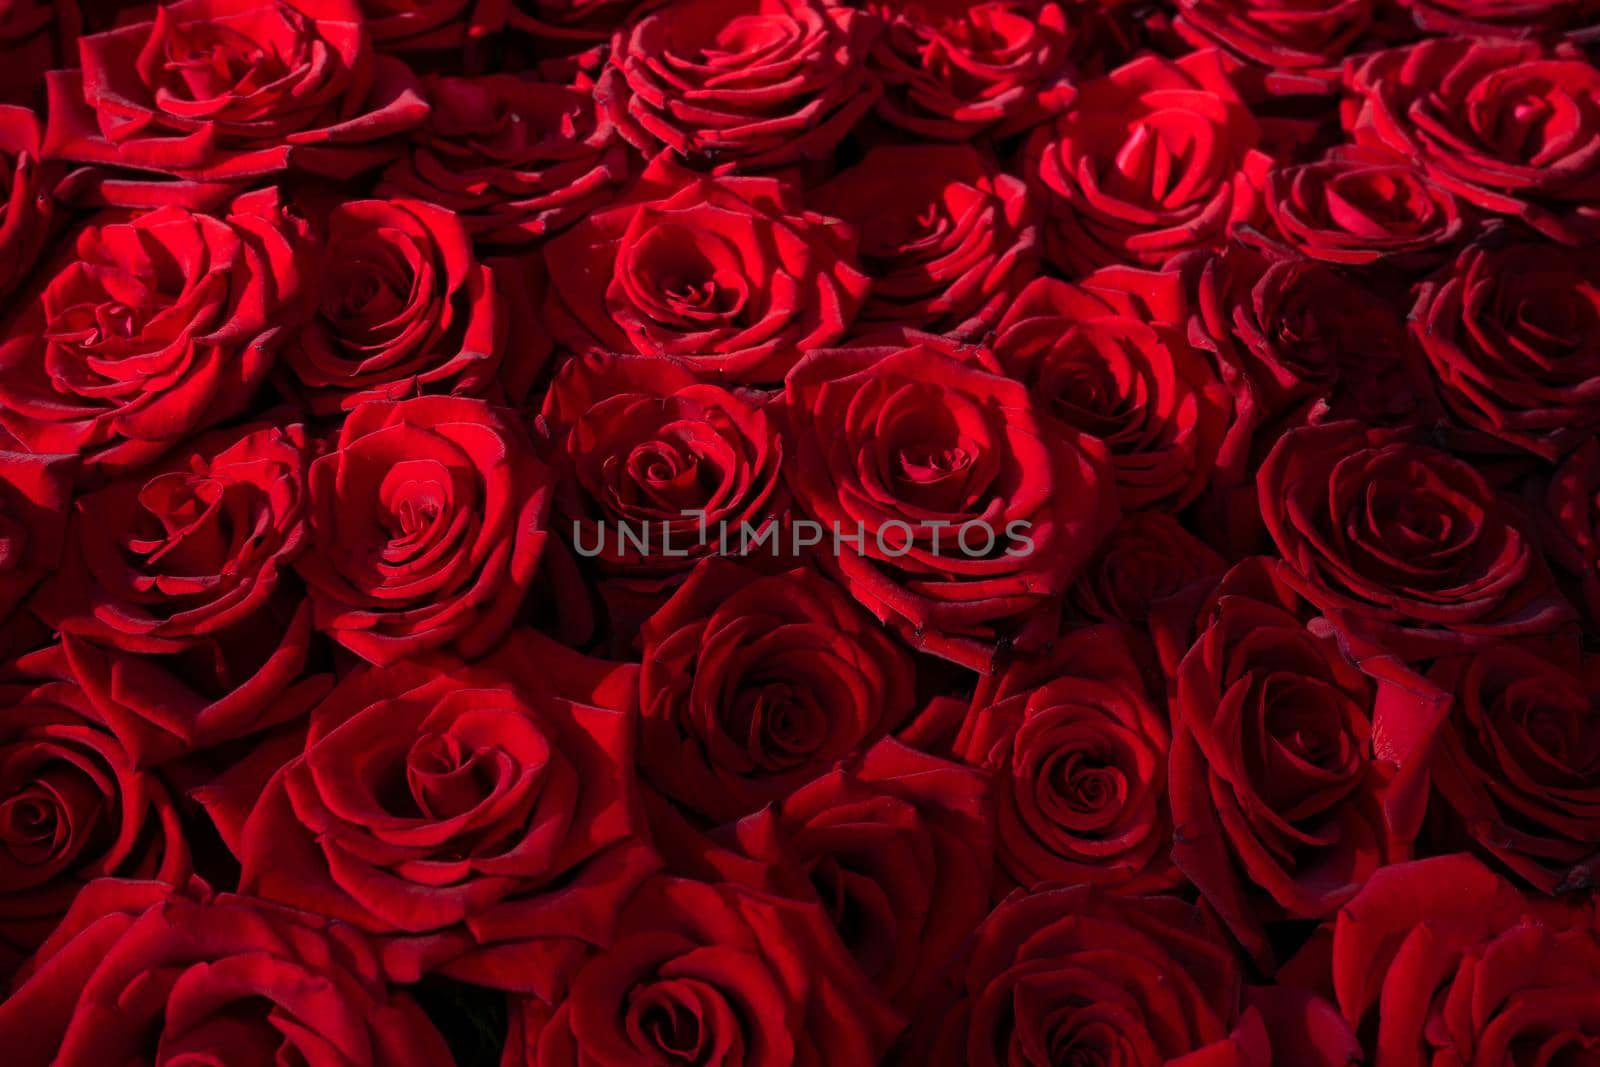 Many blooming red roses with romantic lighting by Serhii_Voroshchuk